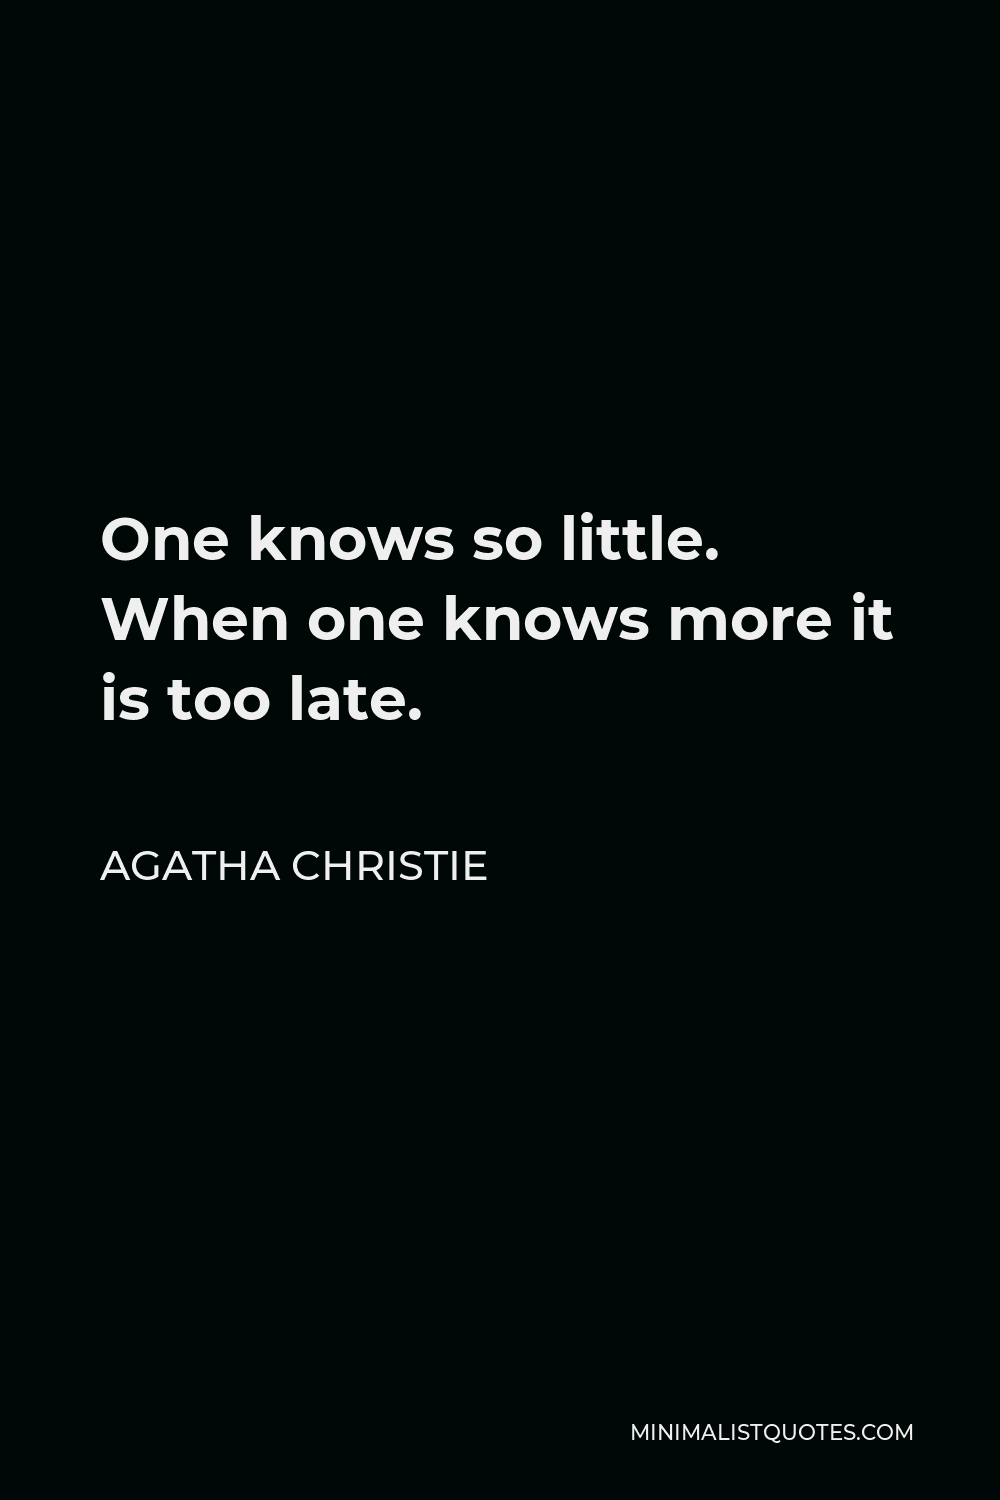 Agatha Christie Quote - One knows so little. When one knows more it is too late.